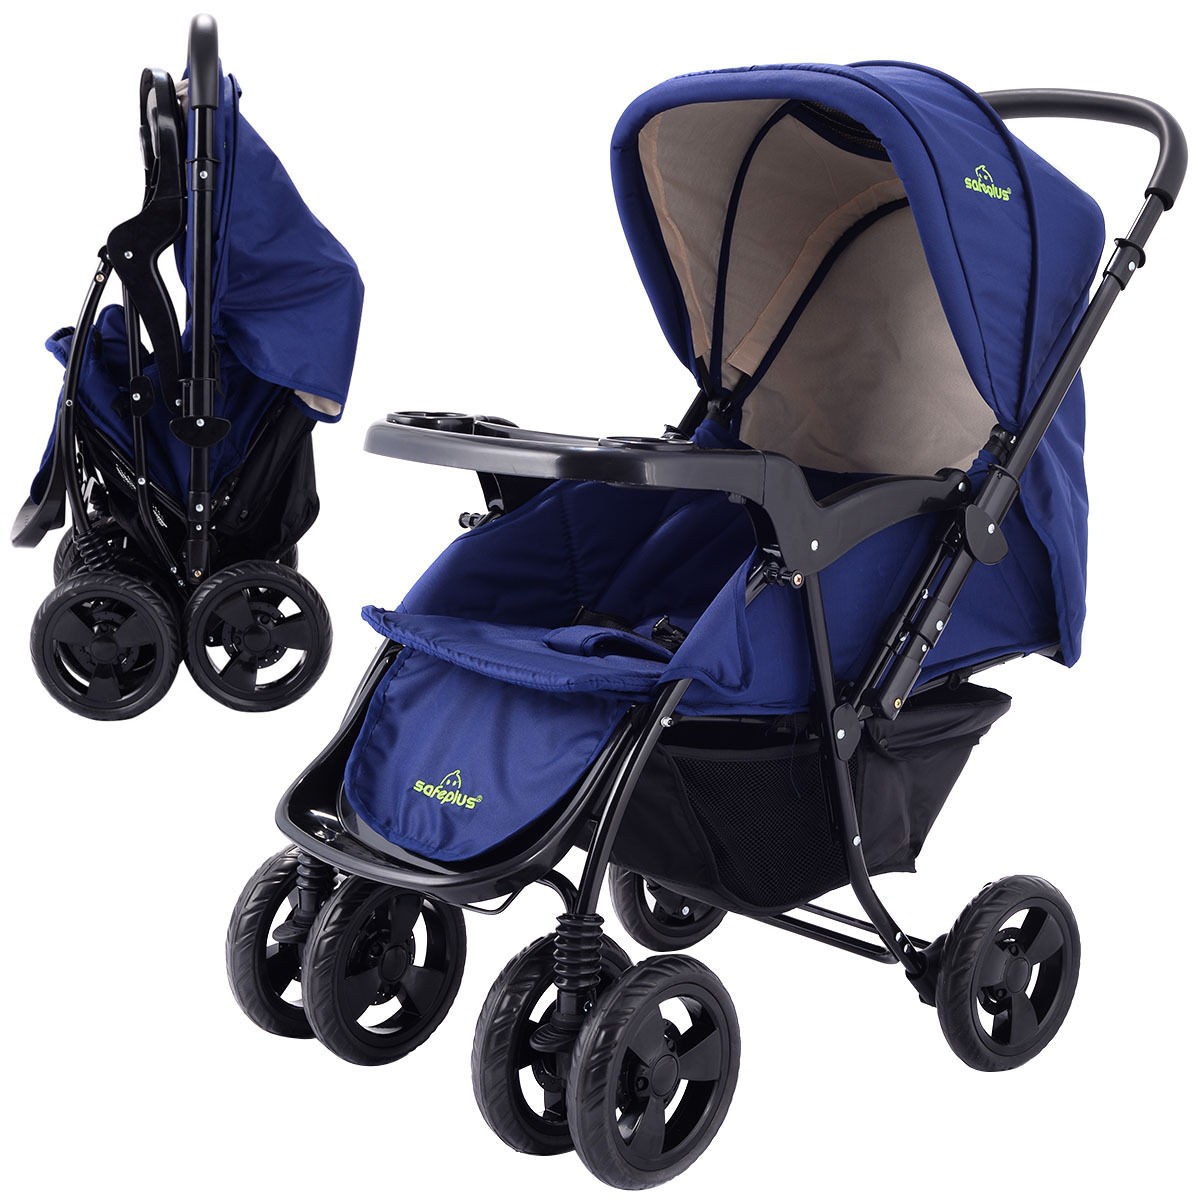 baby buggy for kids